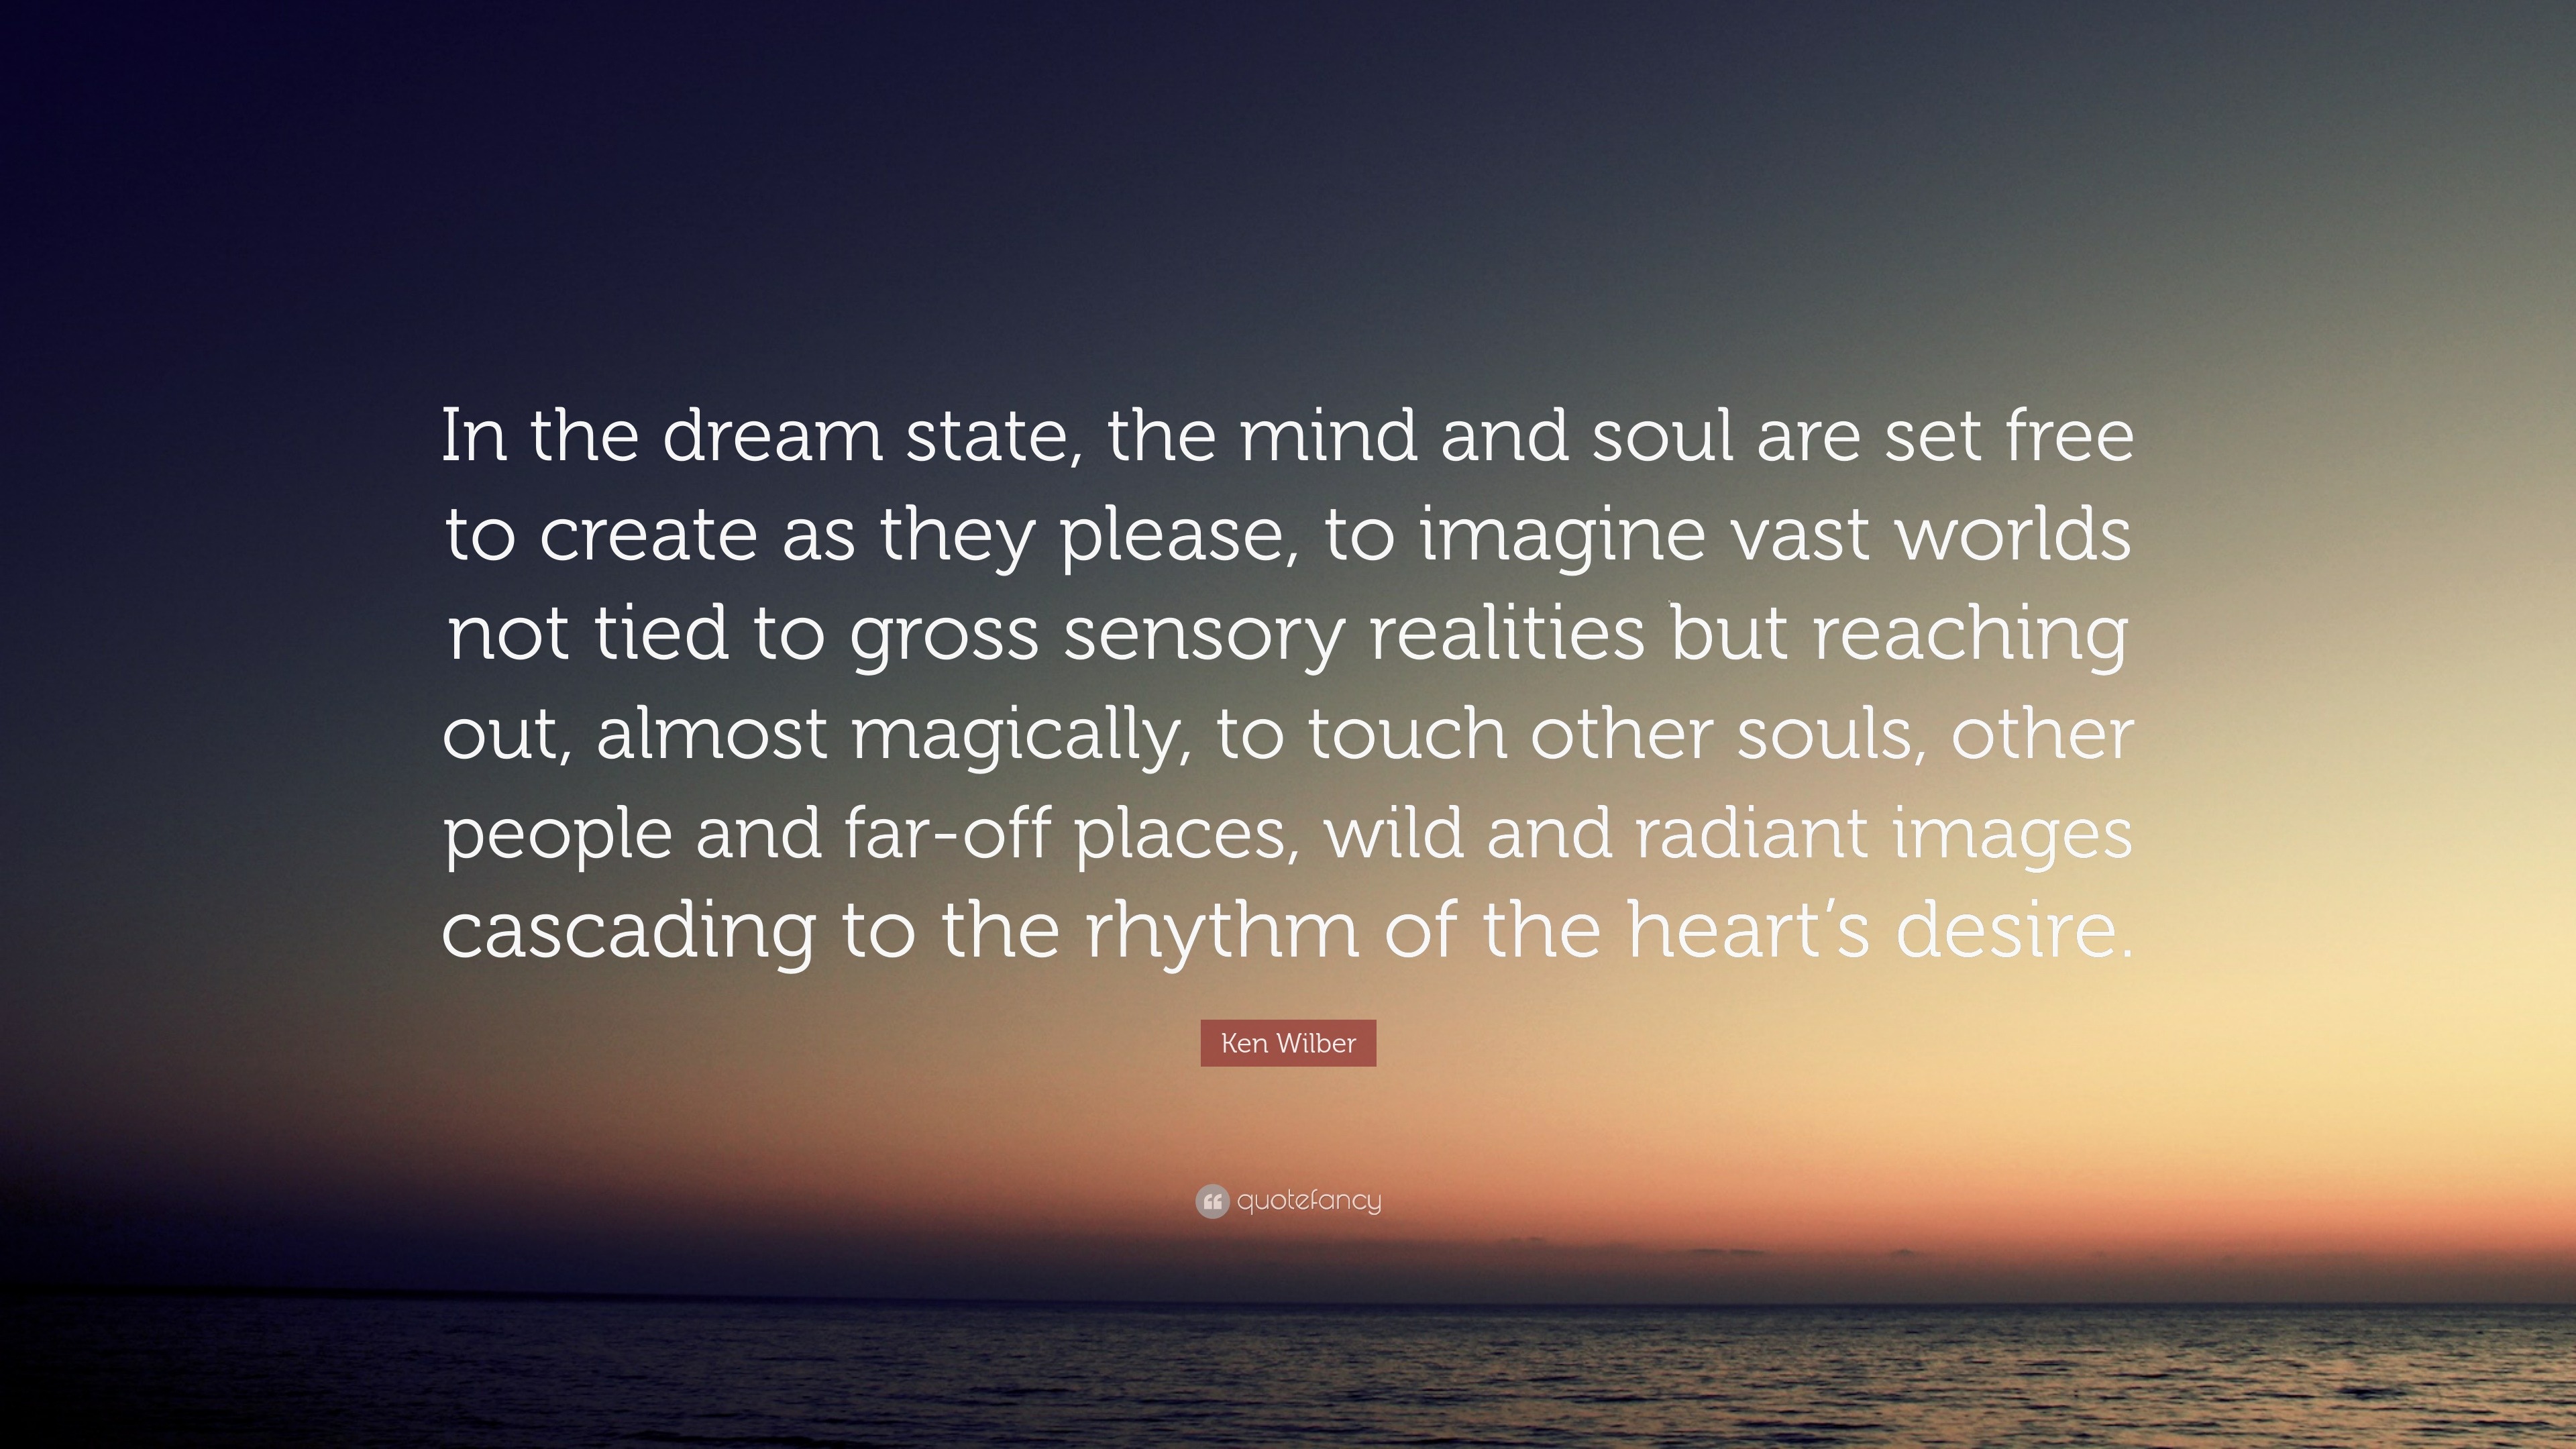 Ken Wilber Quote: “In the dream state, the mind and soul are set free to  create as they please, to imagine vast worlds not tied to gross se”